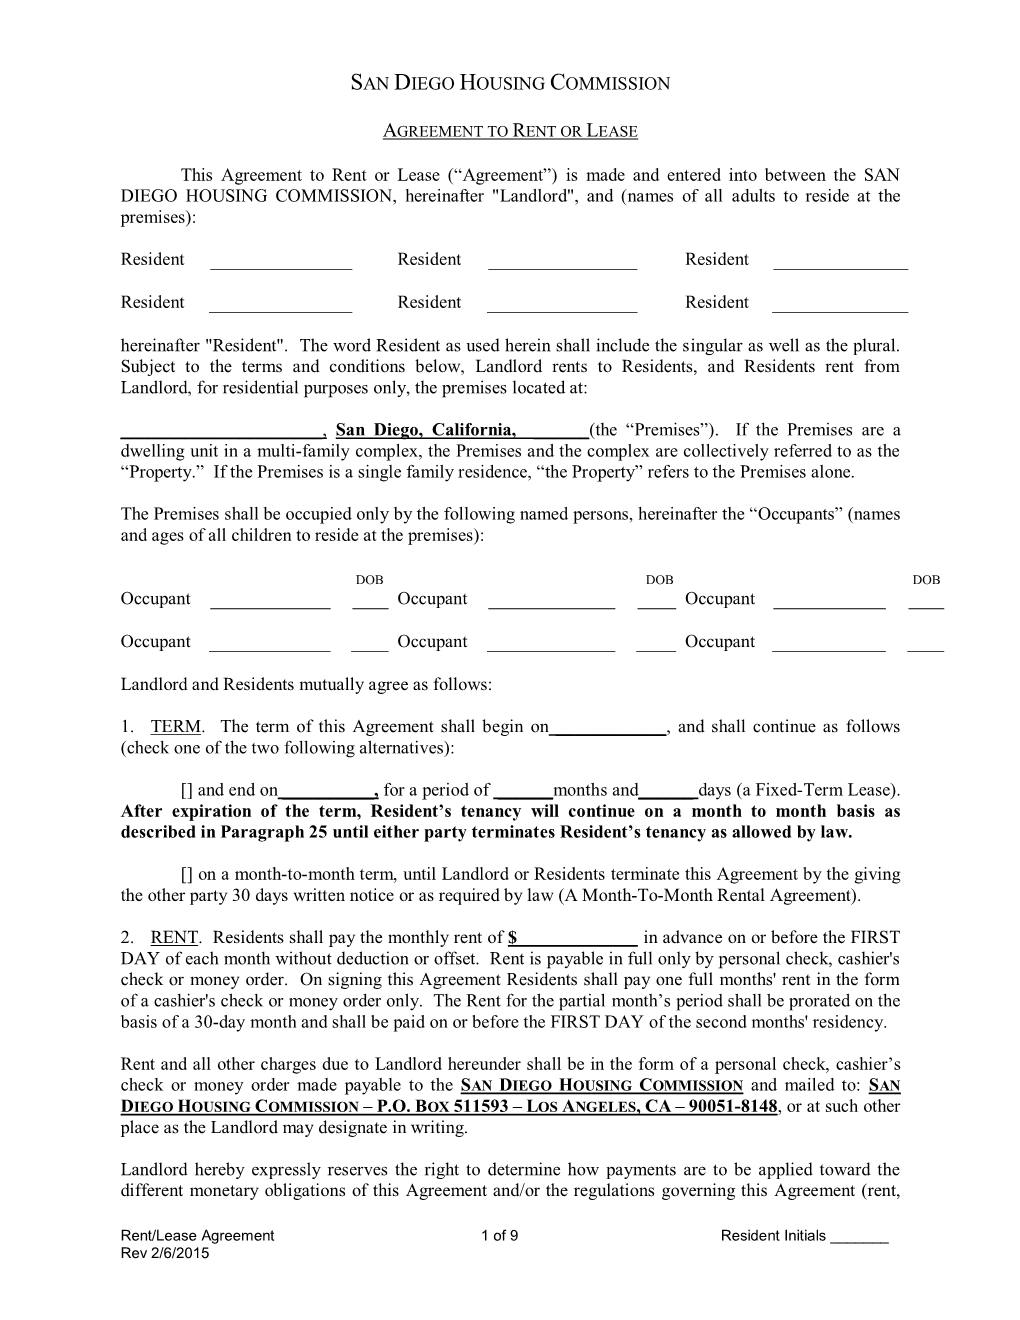 SDHC Lease Agreement